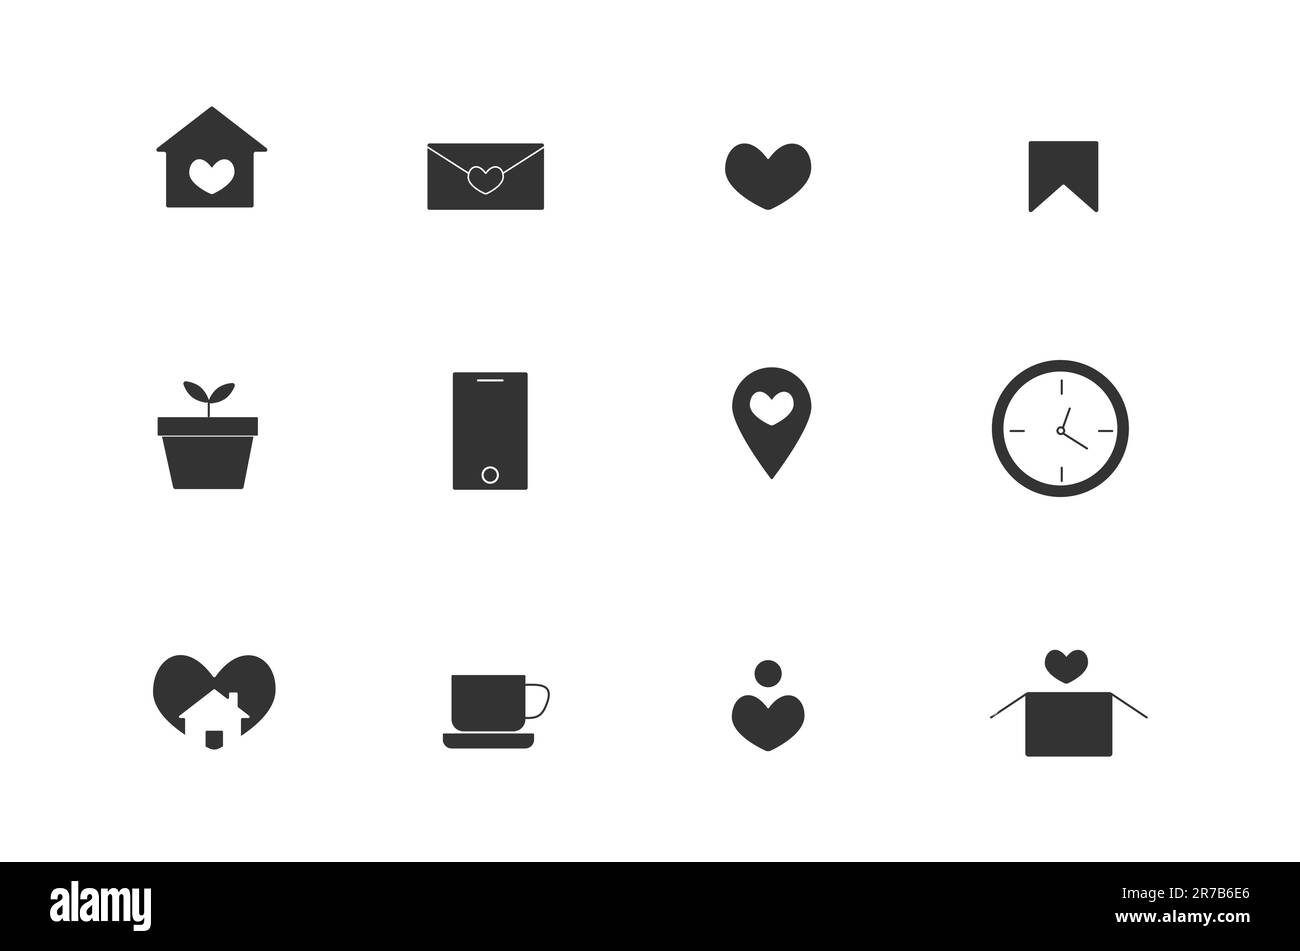 Linear art set of icons for home social networking, heart filled Stock Vector